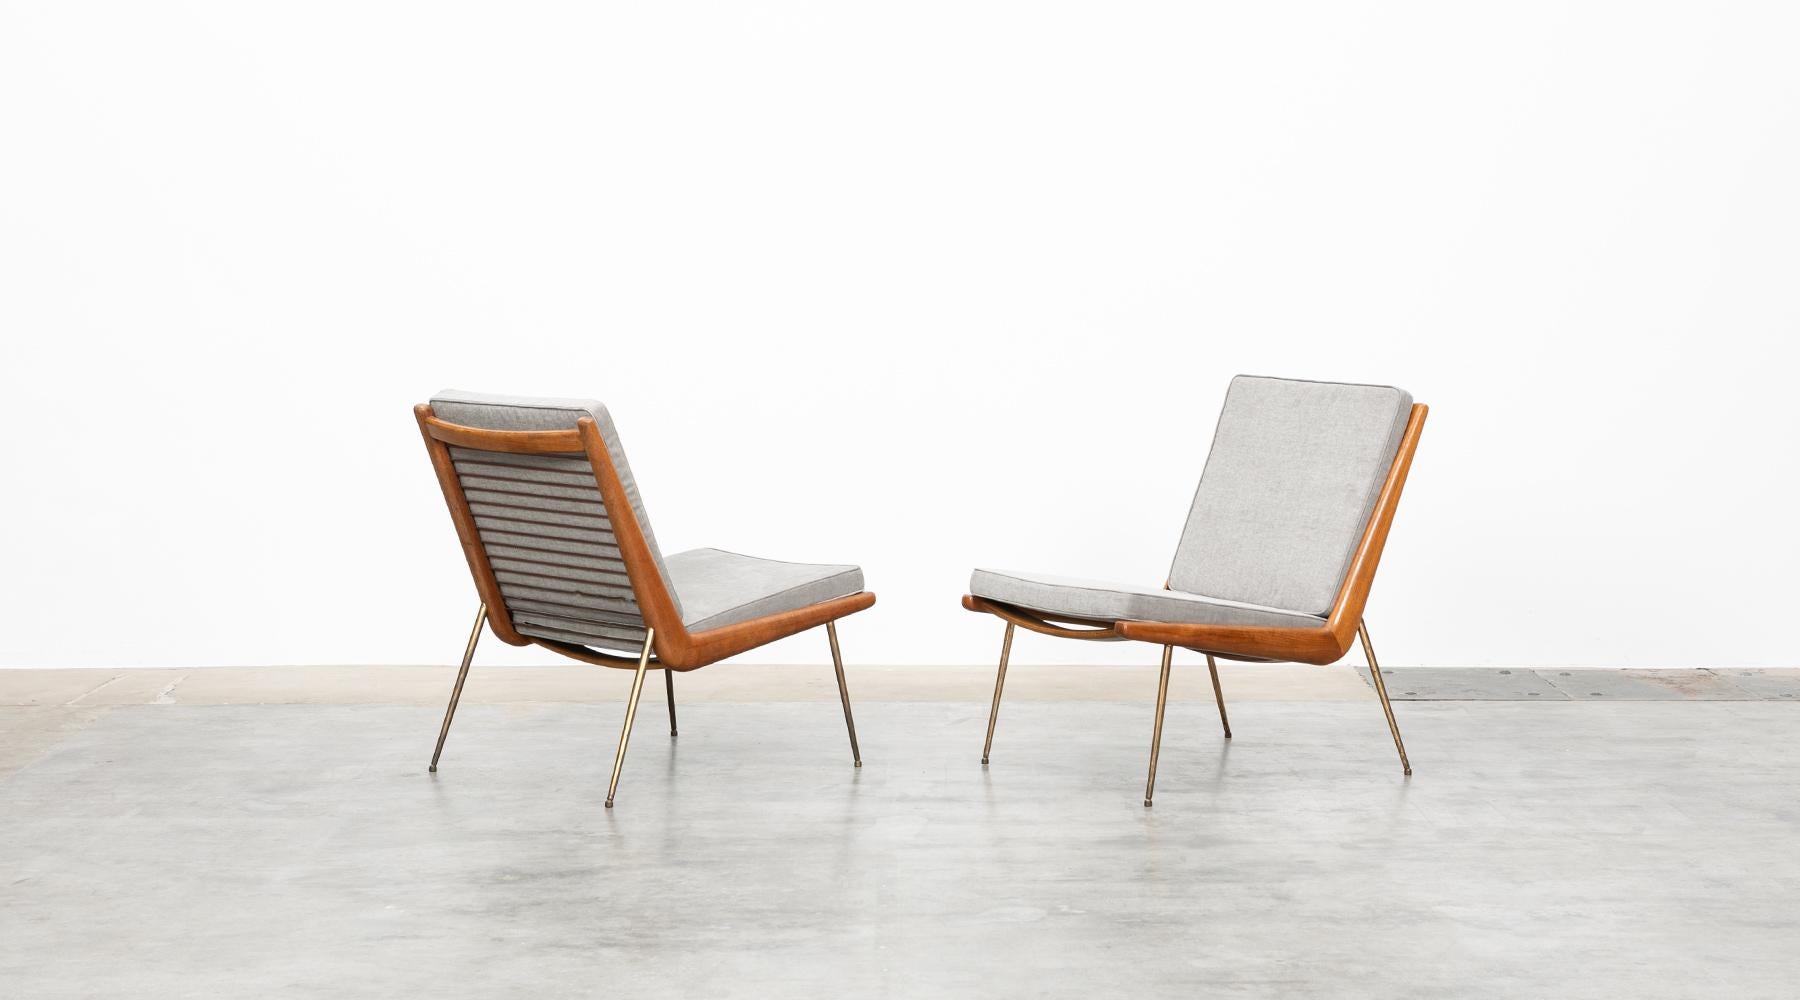 Lounge Chairs, teak and brass, upholstery, Peter Hvidt, Denmark, 1955.

Peter Hvidt and Orla Mølgaard-Nielsen designed this legendary pair of Lounge Chairs. The sculptural design made of teak and the finely crafted braces in the back has been